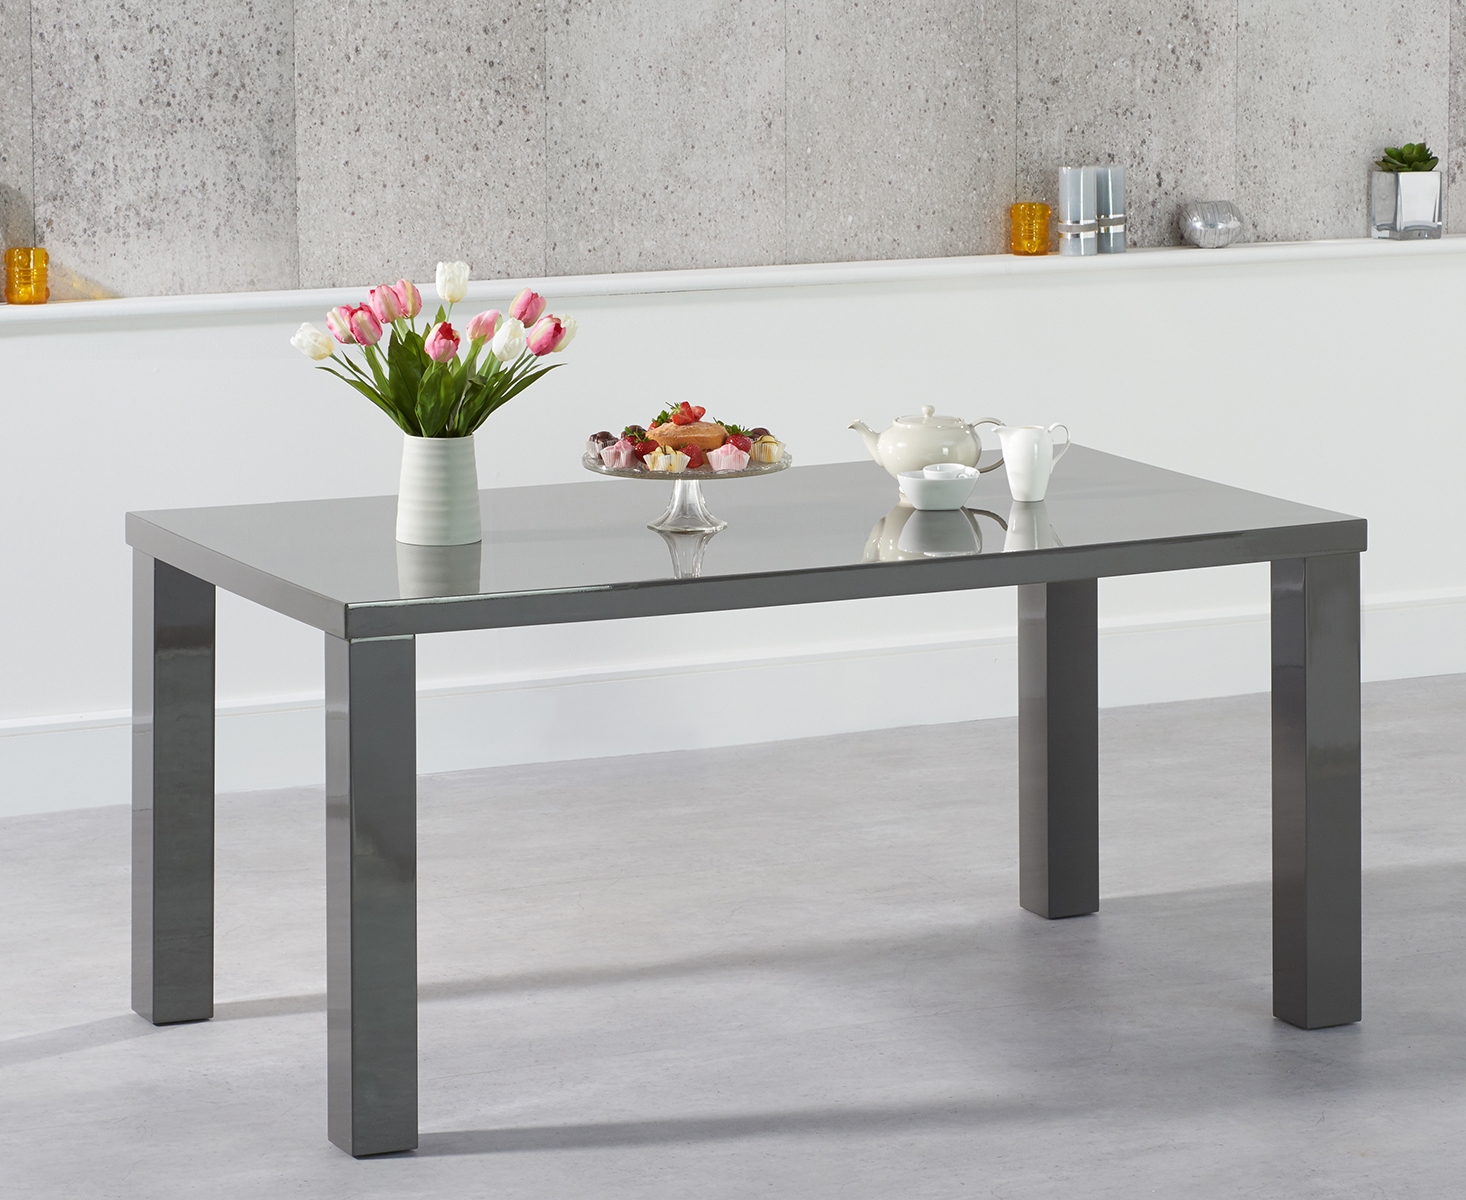 Photo 1 of Seattle 160cm dark grey high gloss dining table with austin benches